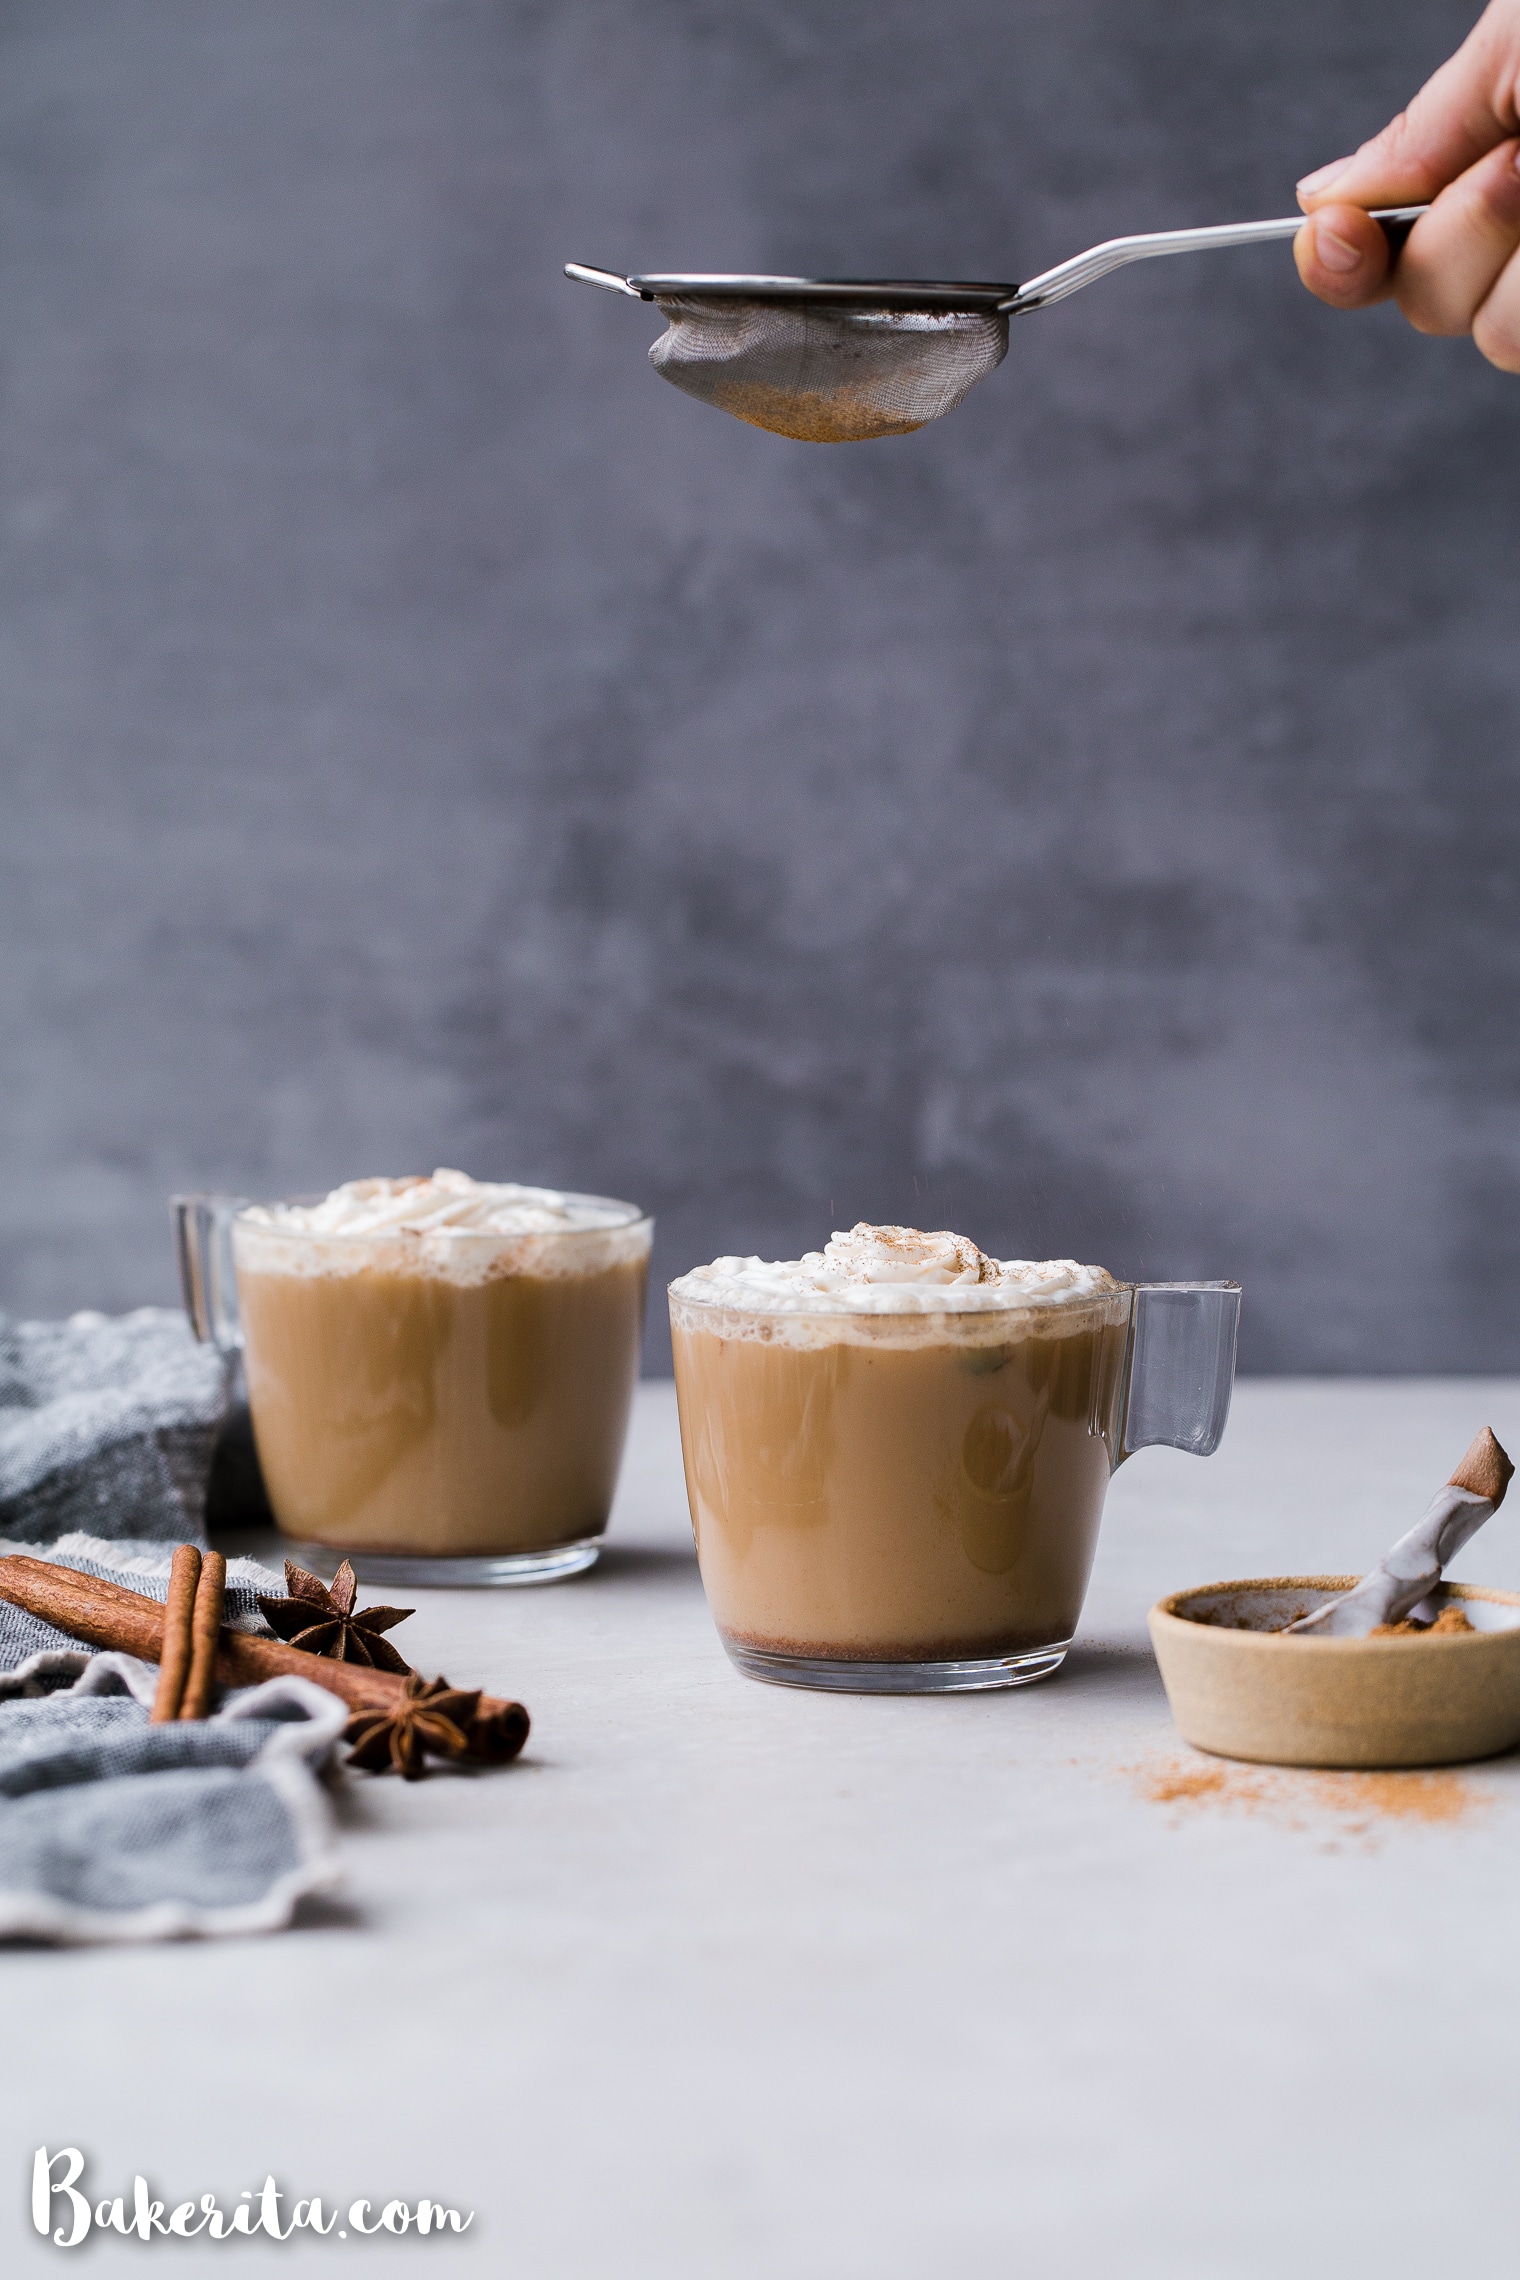 This spicy homemade Vegan Chai Latte is made with almond milk and sweetened naturally with maple syrup. The homemade chai spice mix is full of ginger, cinnamon, black pepper, and other warm spices. It's the perfect drink for chillier days.